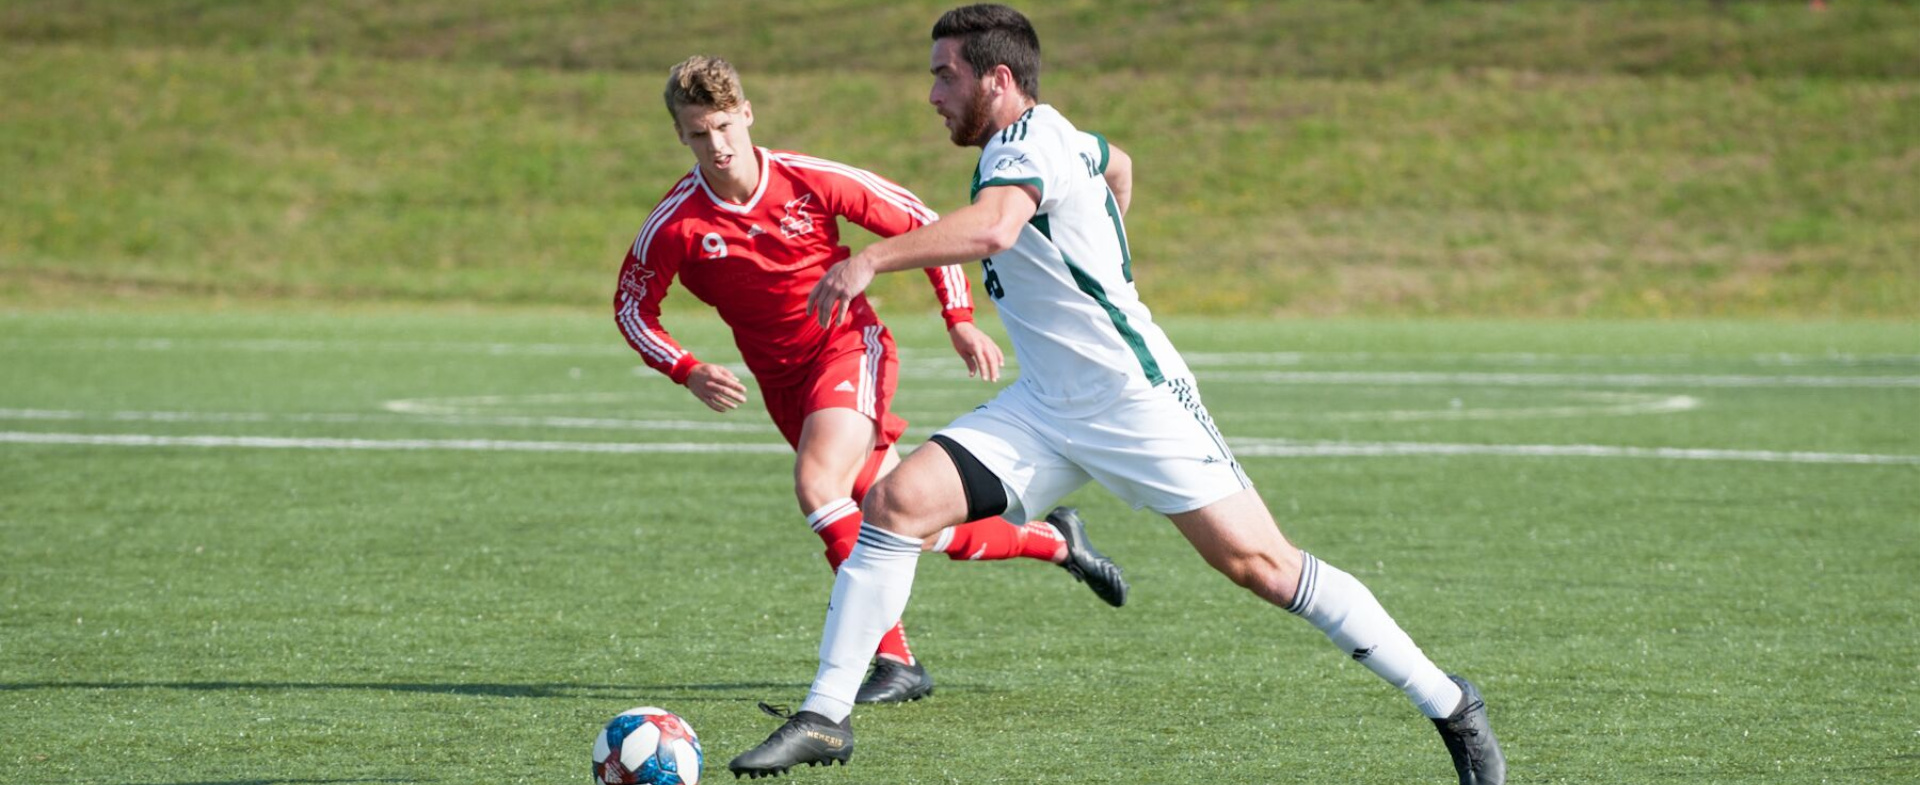 SEA-HAWKS COME HOME TO LOOK FOR ANOTHER WIN